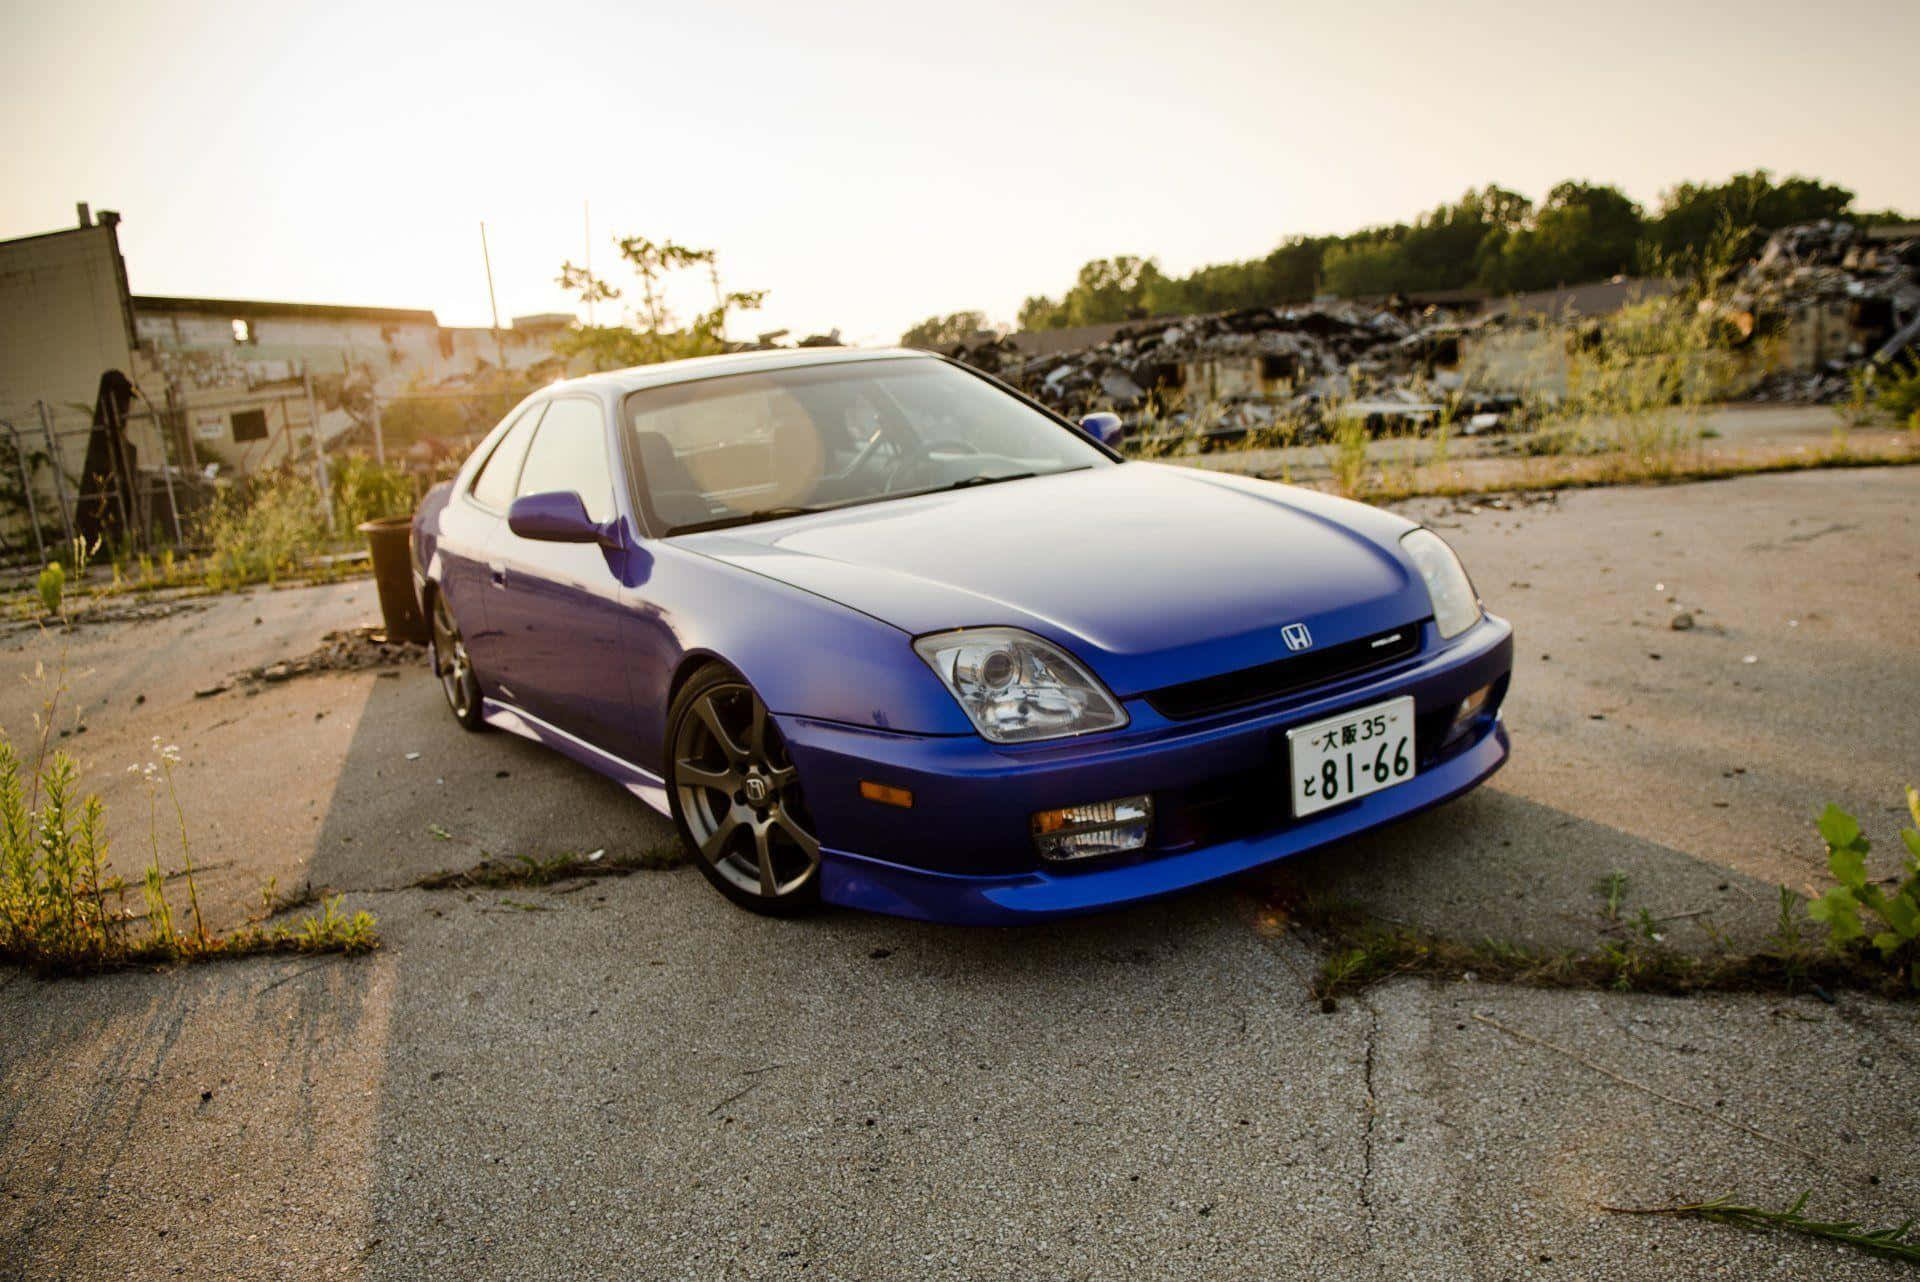 Sleek Honda Prelude in a picturesque setting Wallpaper